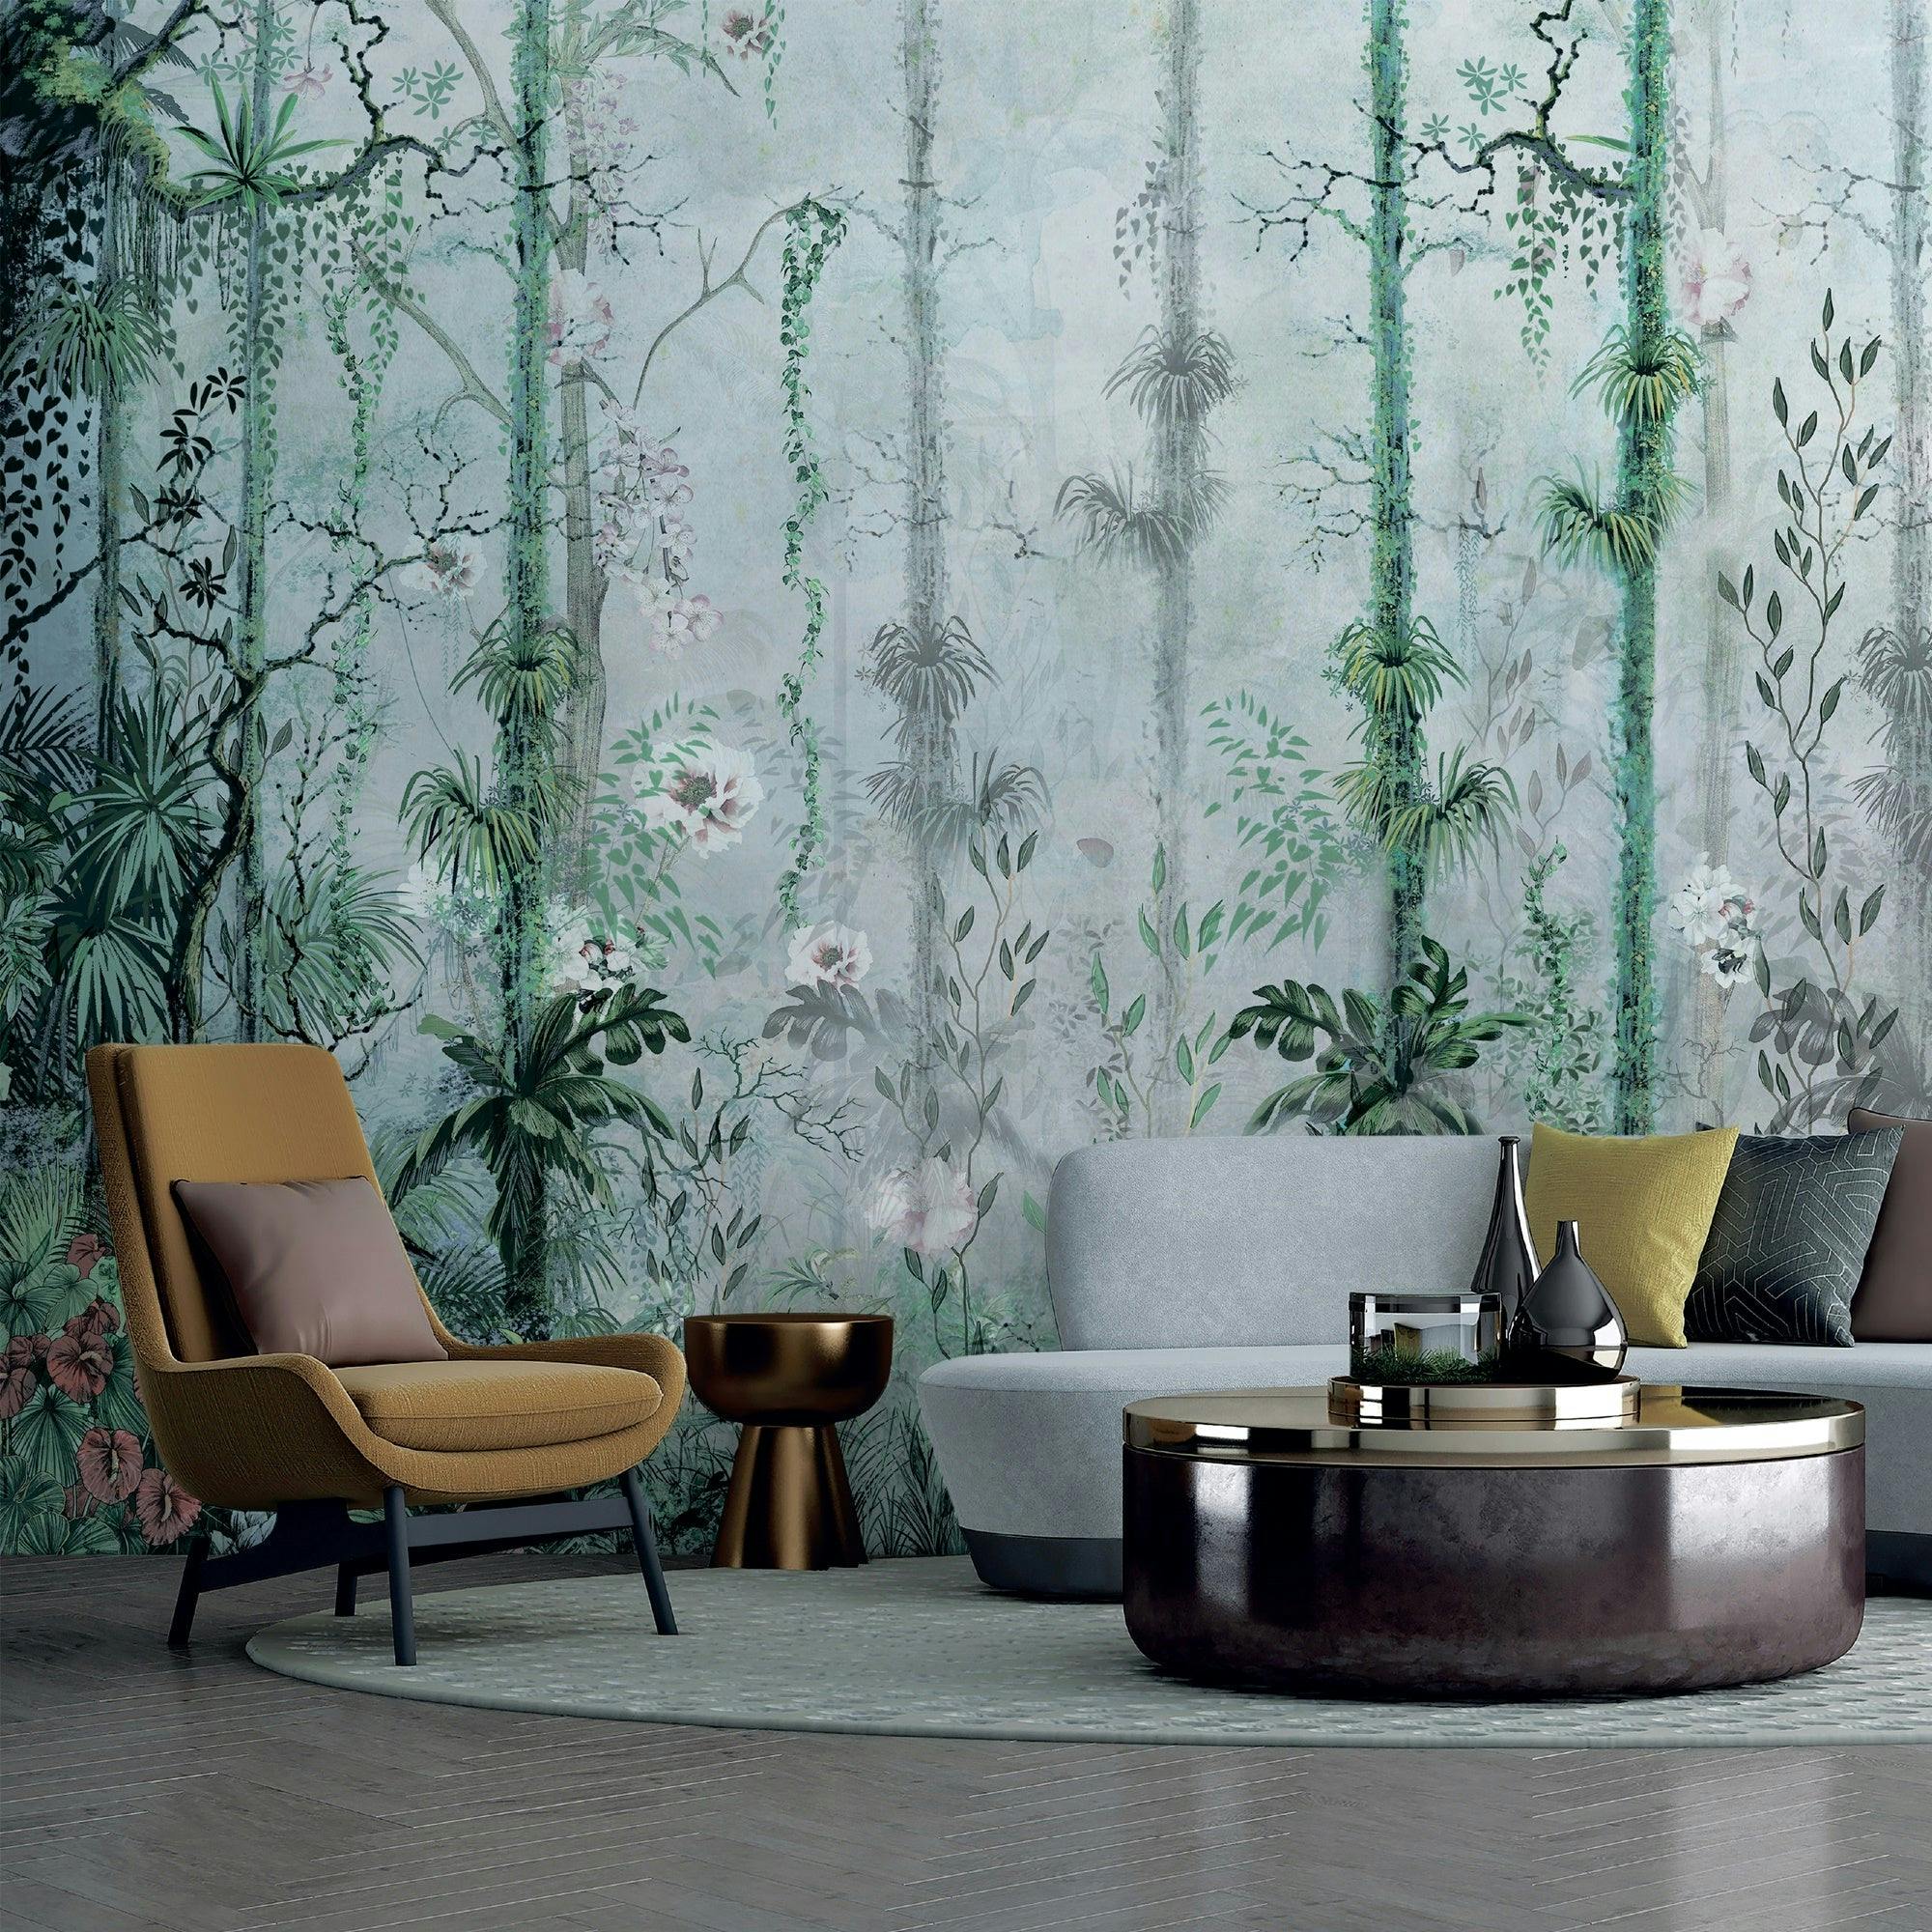 Misty Tropical Forest Mural Wallcovering